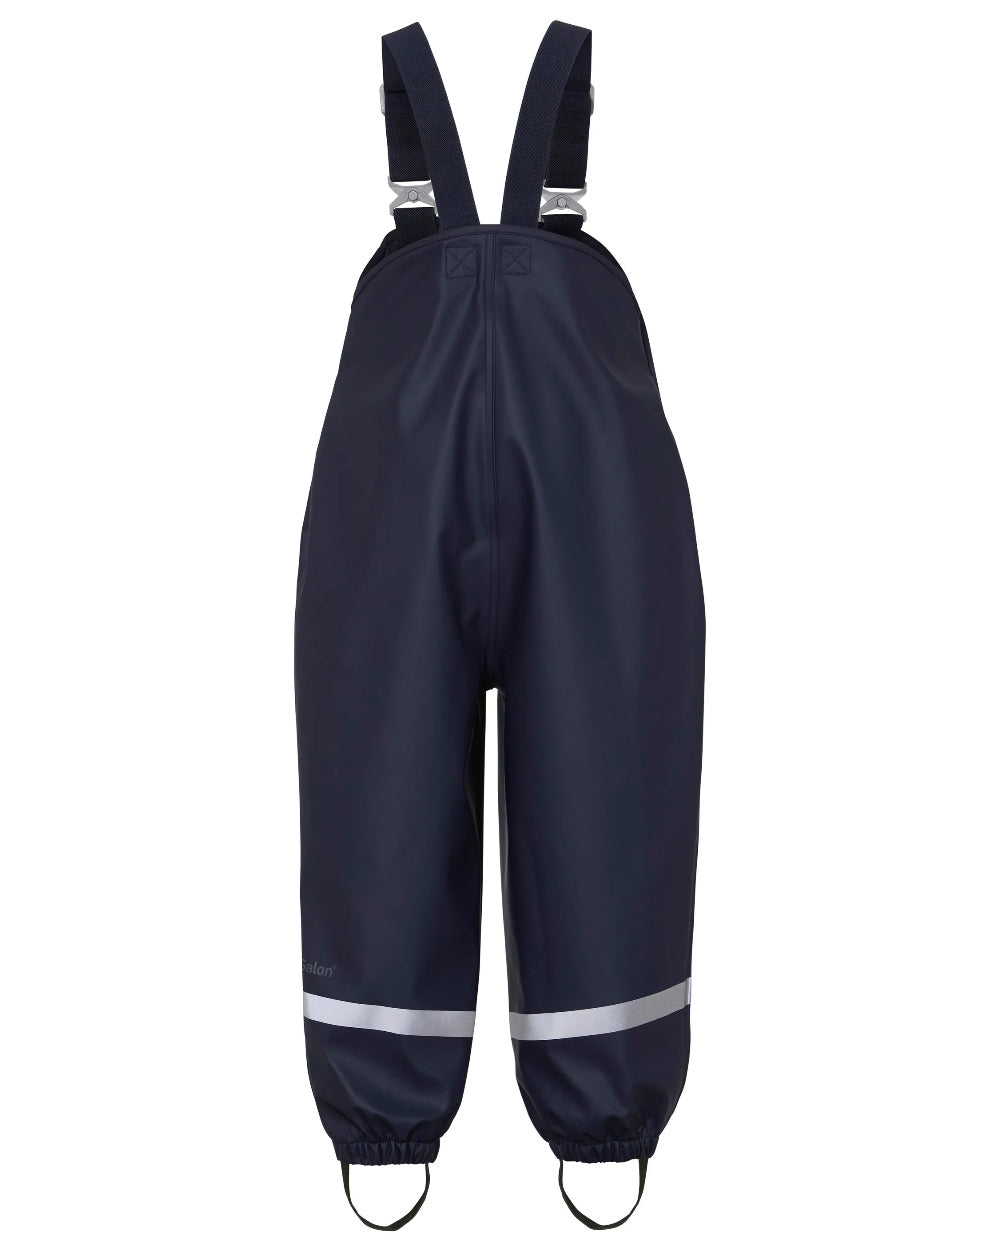 Navy Coloured Didriksons Plaskeman Childrens Pants Galon On A White Background 